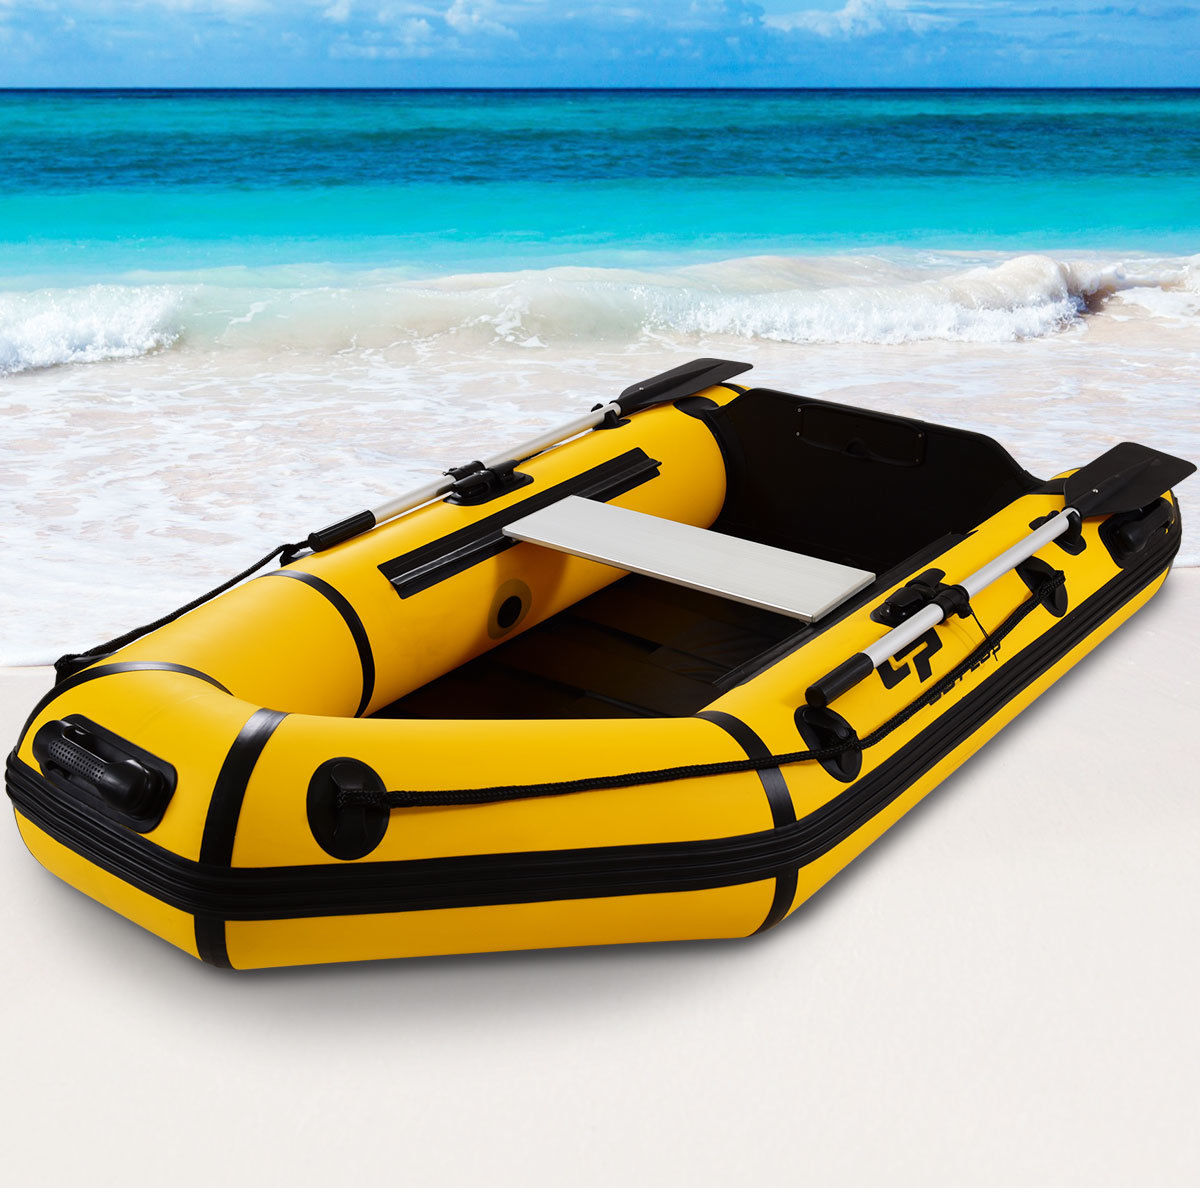 Goplus 2 Person 7.5FT Inflatable Dinghy Boat Fishing Tender Rafting Water (Best Inflatable Fly Fishing Boat)